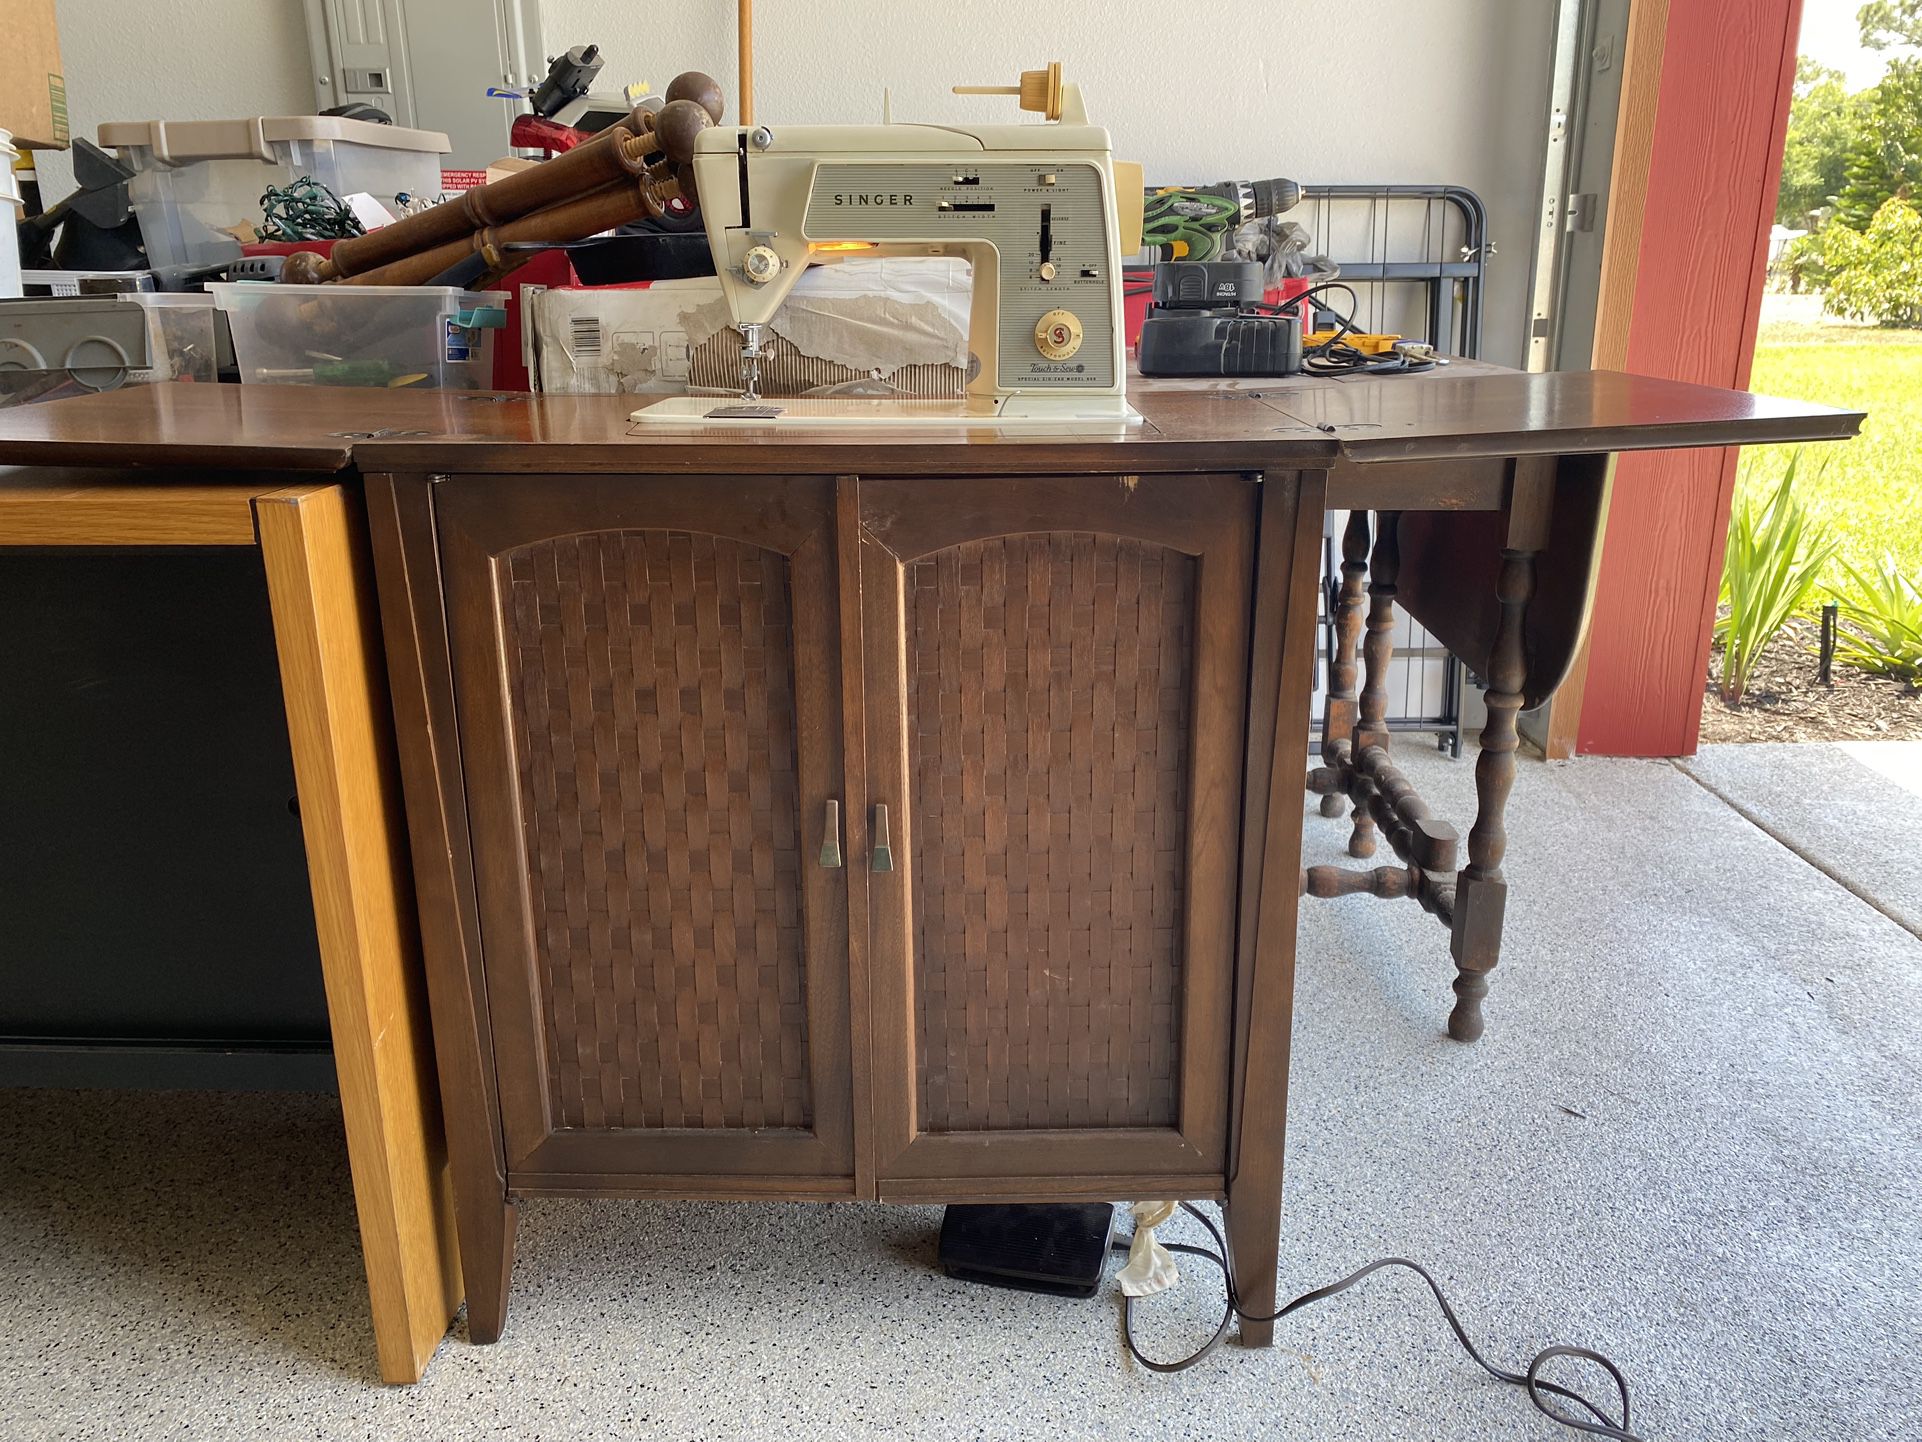 Sewing Machine Cabinet With Singer Sewing Machine 